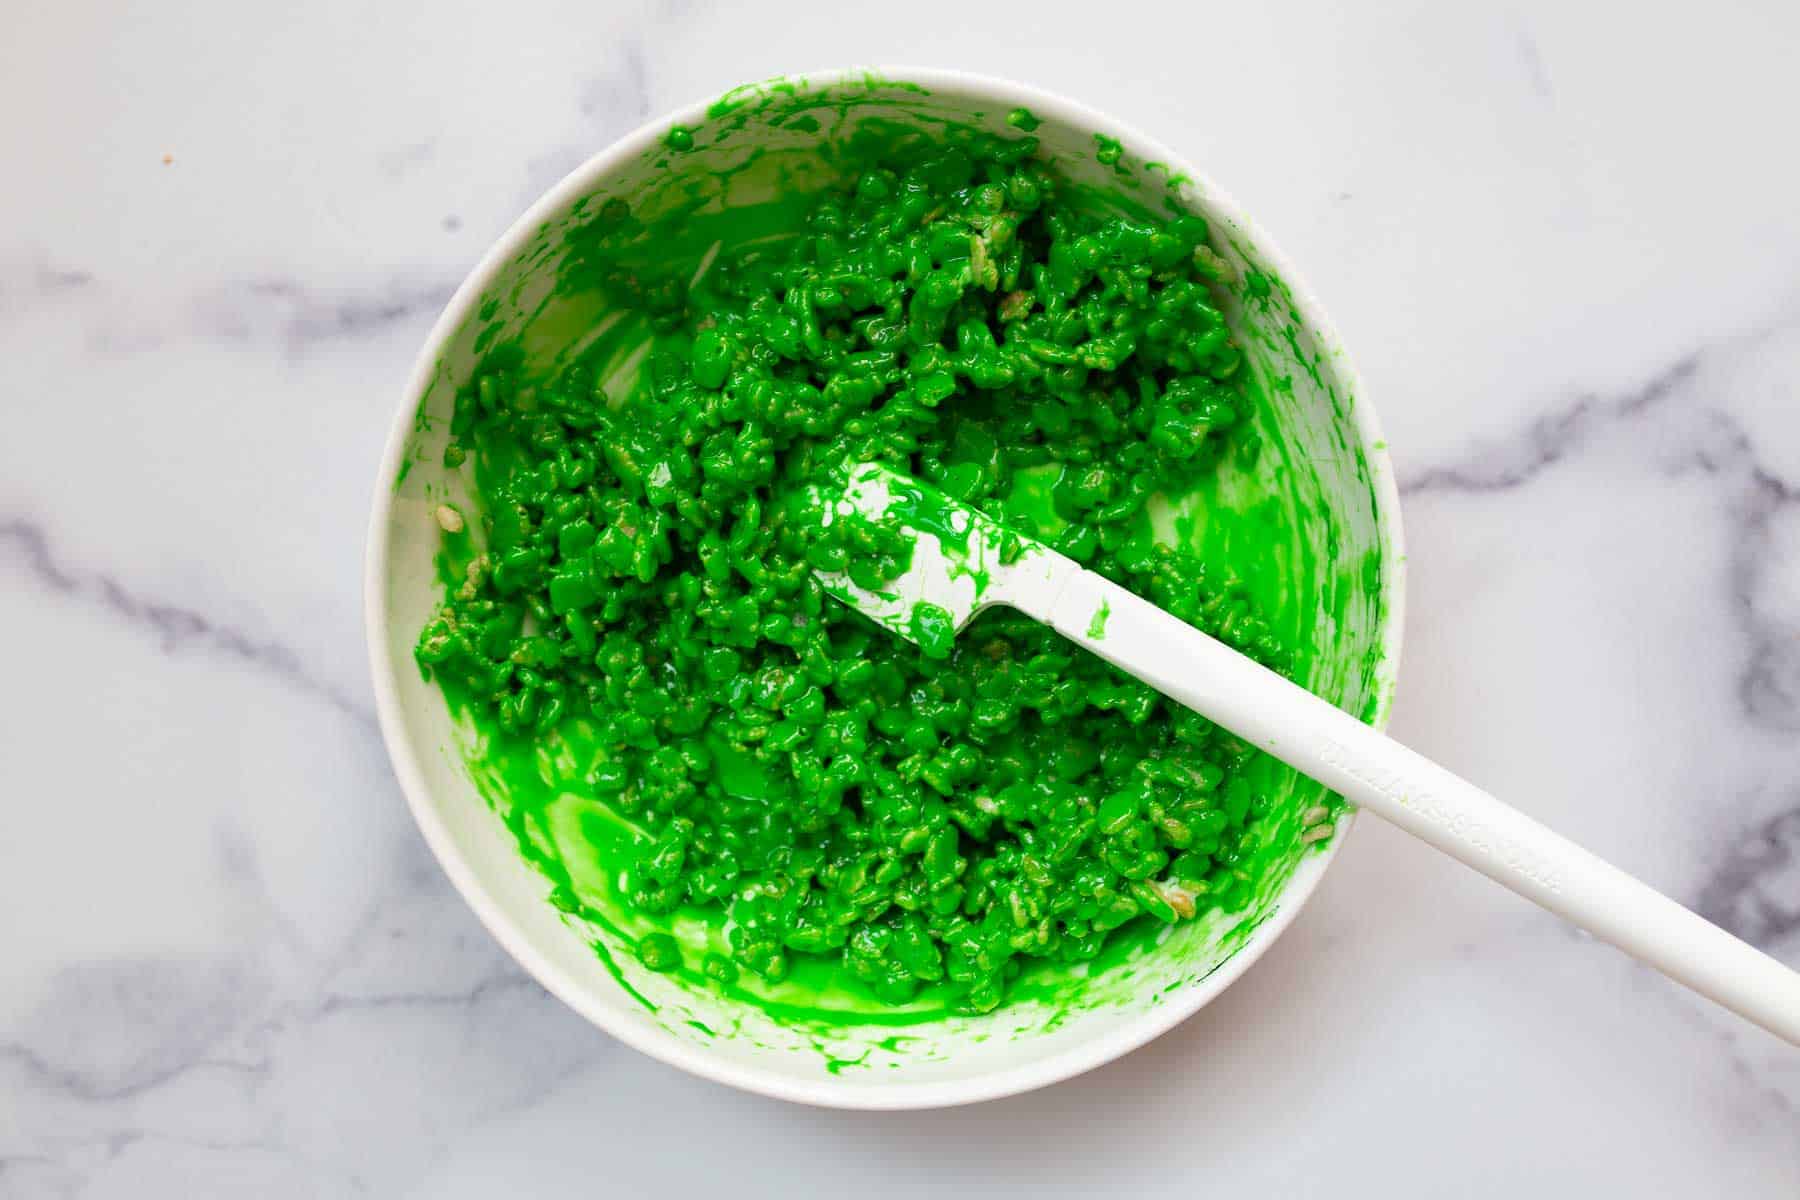 Rice Krispies dyed green in small white bowl with white spatula.